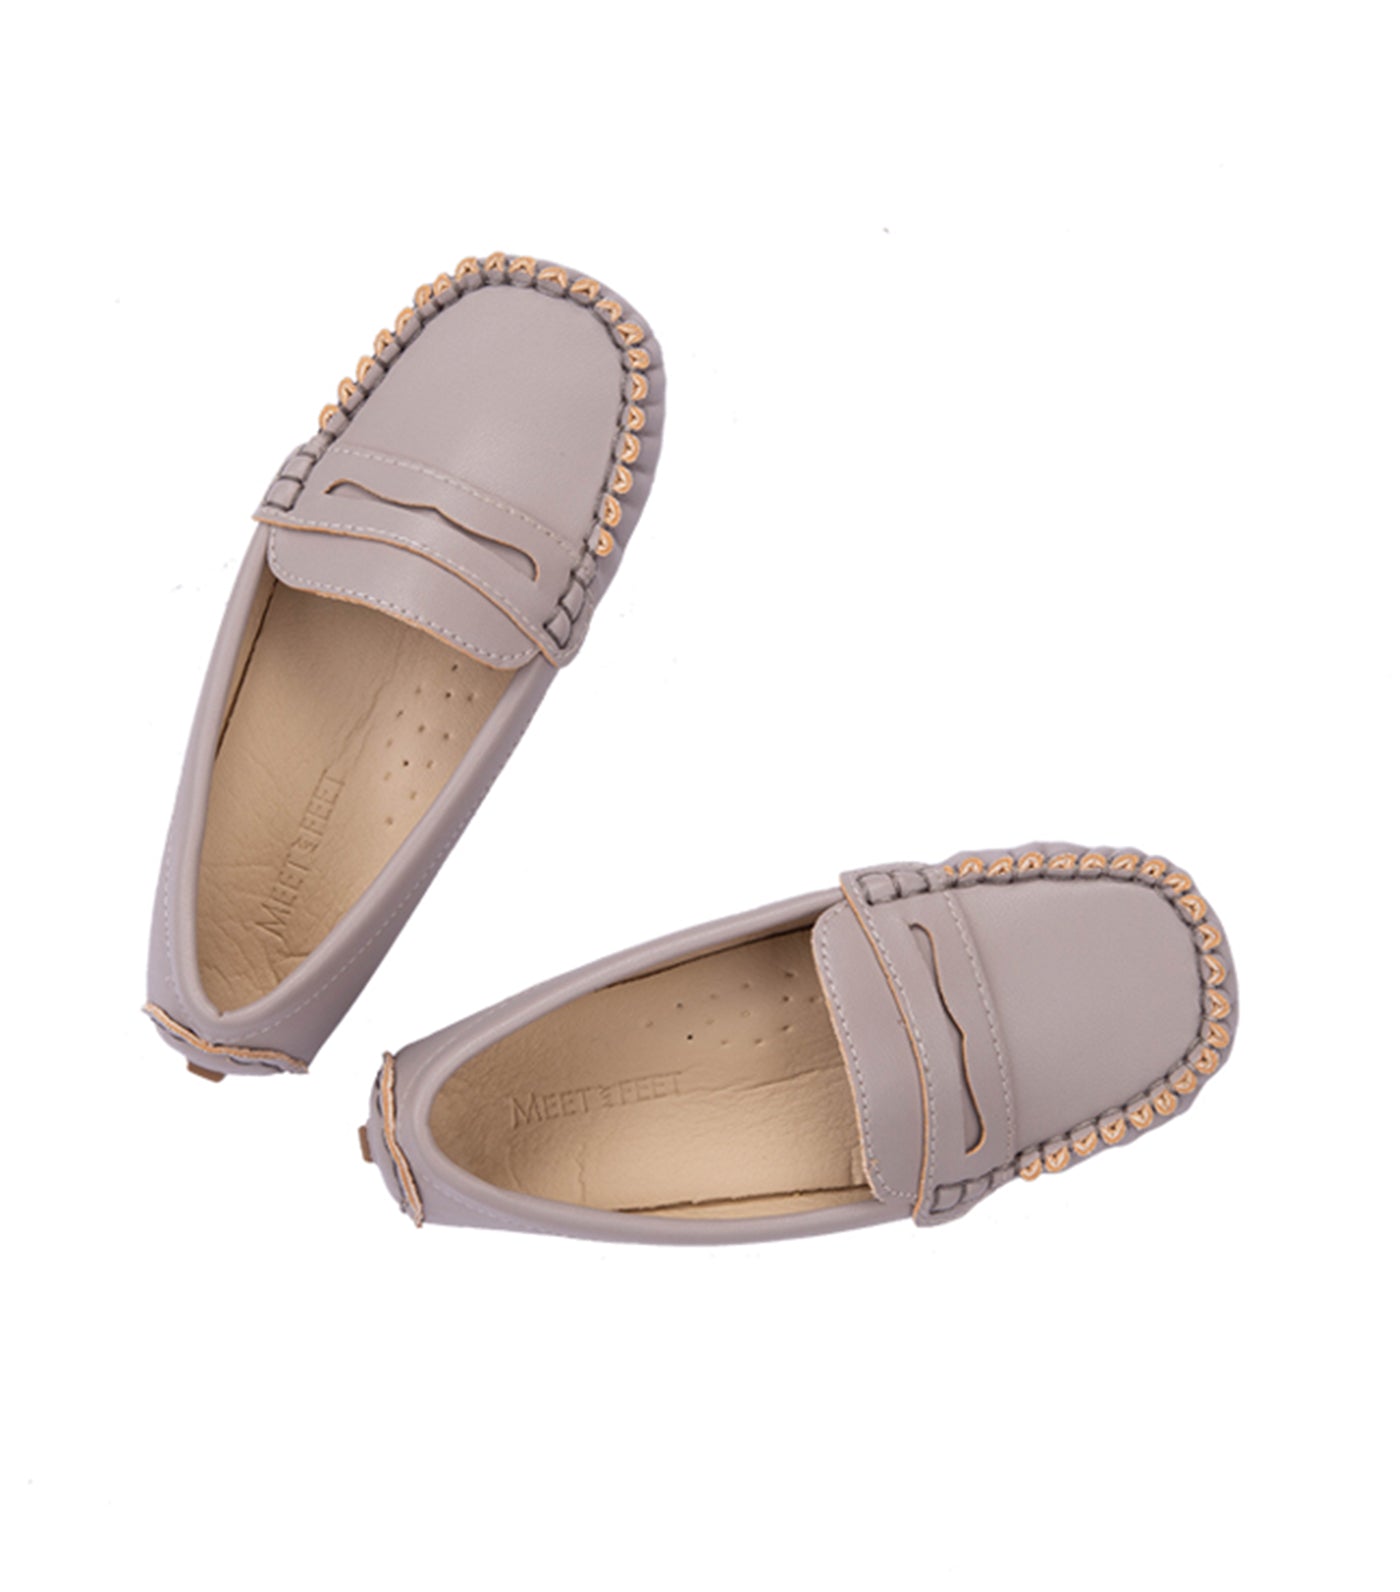 Seal Kids Loafers for Boys - Gray